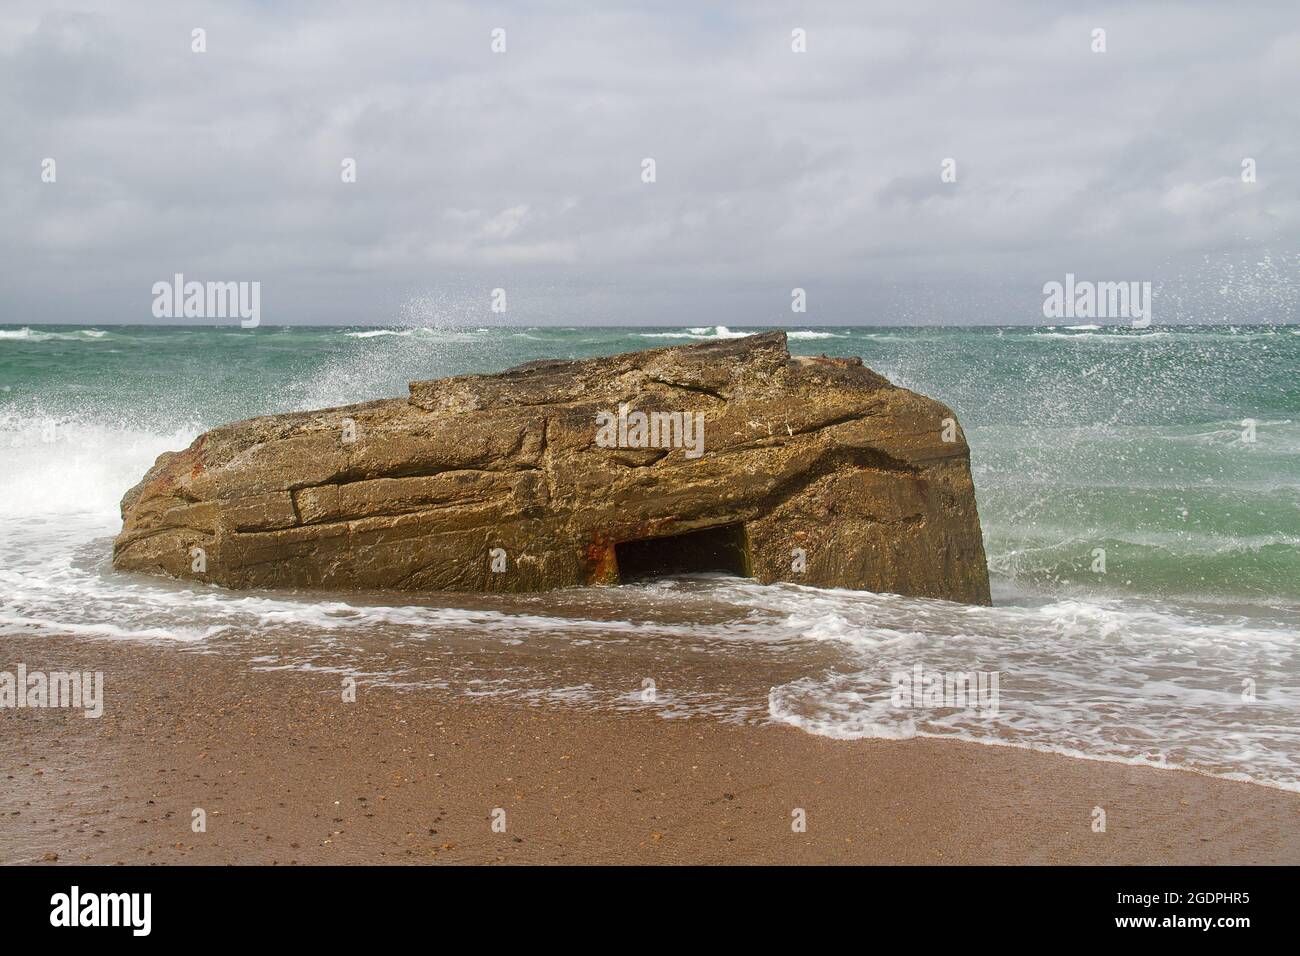 Waves splash against a German bunker from the second world war, fallen from te dunes in the sea in the Tannis Bugt in Denmark Stock Photo